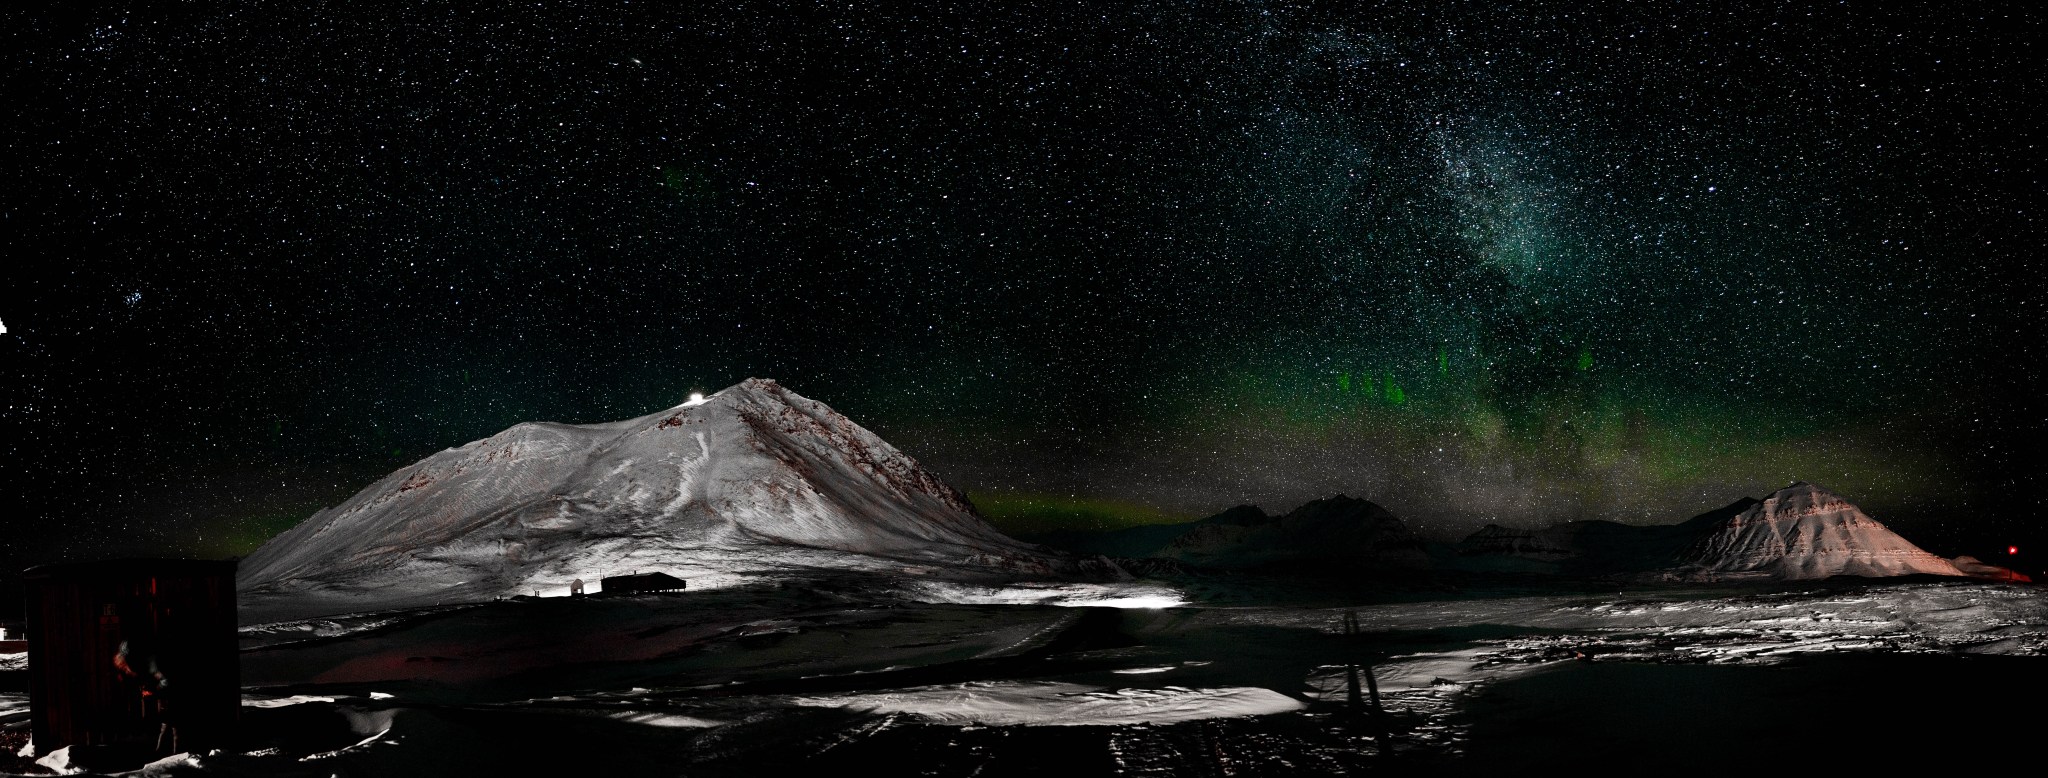 A panoramic photo of the sky at night, appearing mostly black and white except for a blush of green and blue near the horizon indicating the aurora borealis. Whitish peaks of snow jut up like small mountains near the left and right of the image, and the shadow of a person is visible near the center.